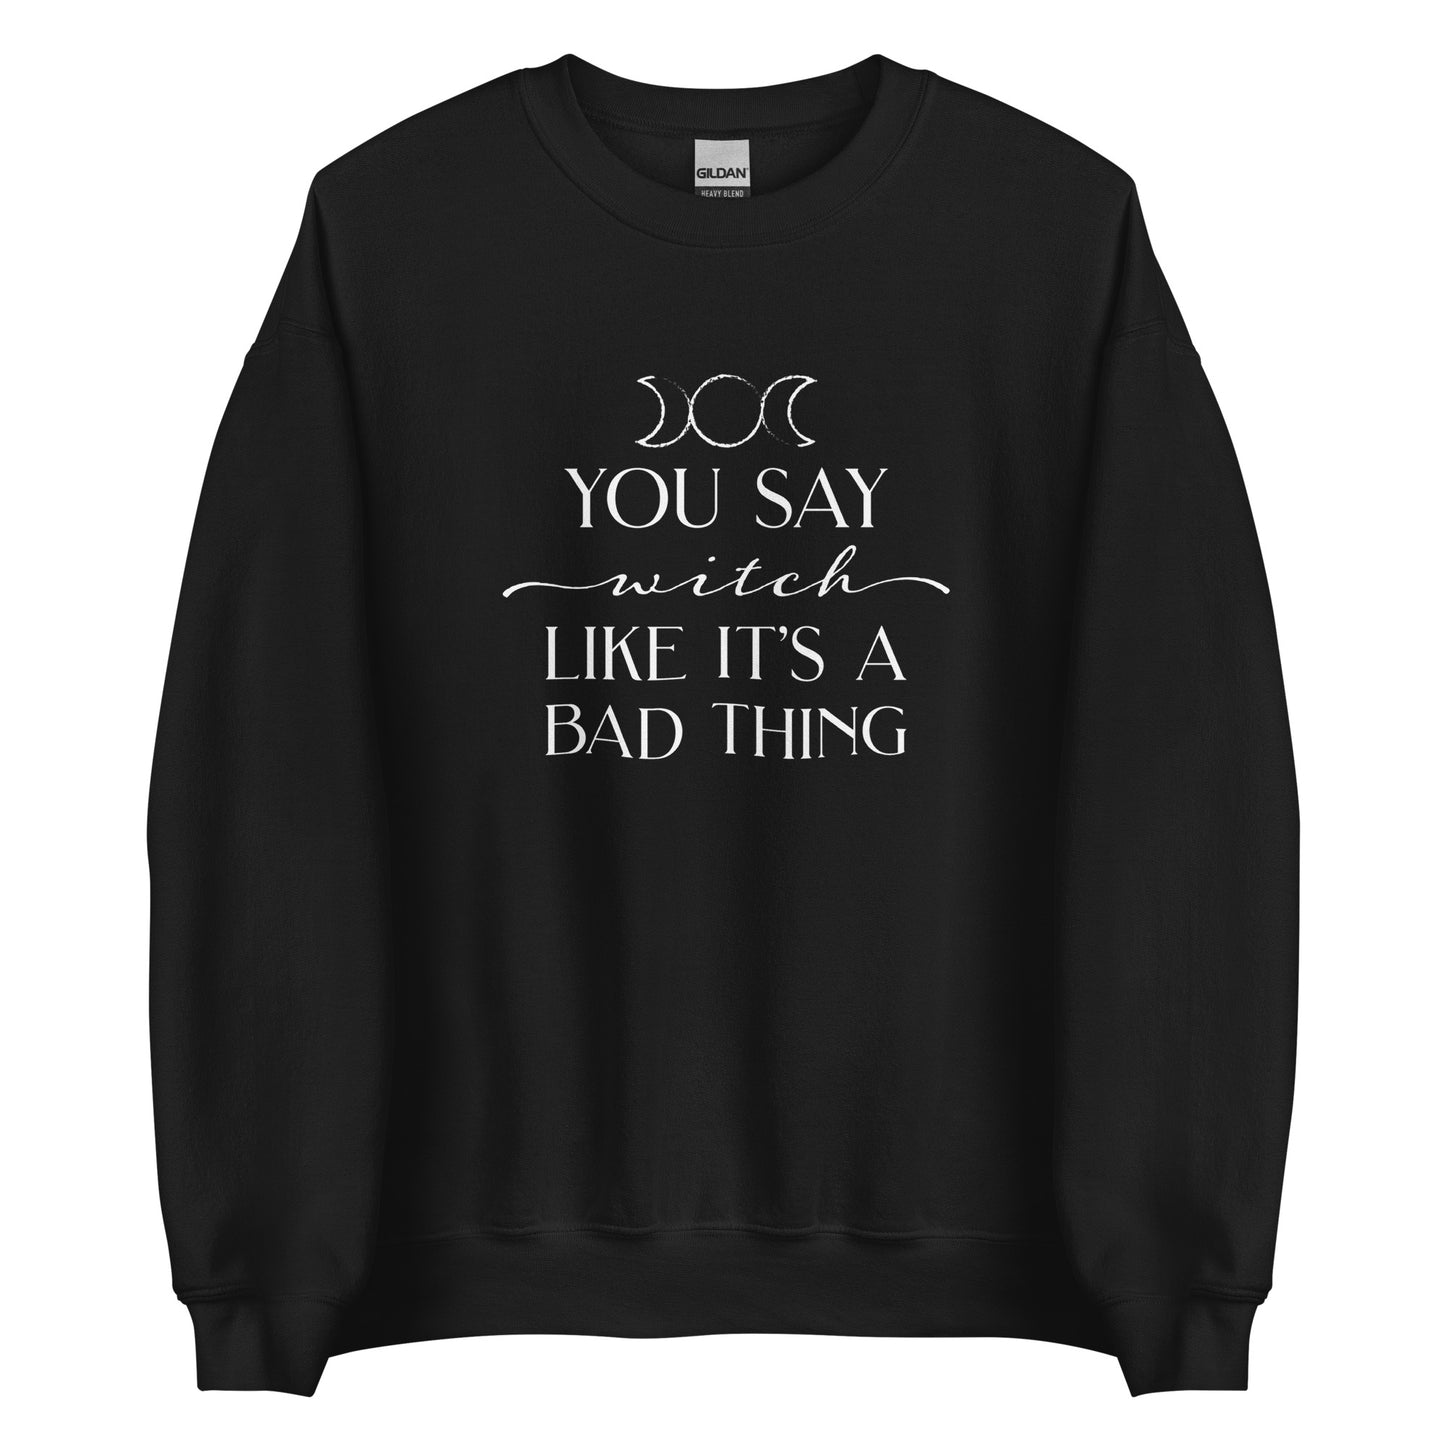 A black crewneck sweatshirt featuring the triple goddess symbol and text reading "You say witch like it's a bad thing"